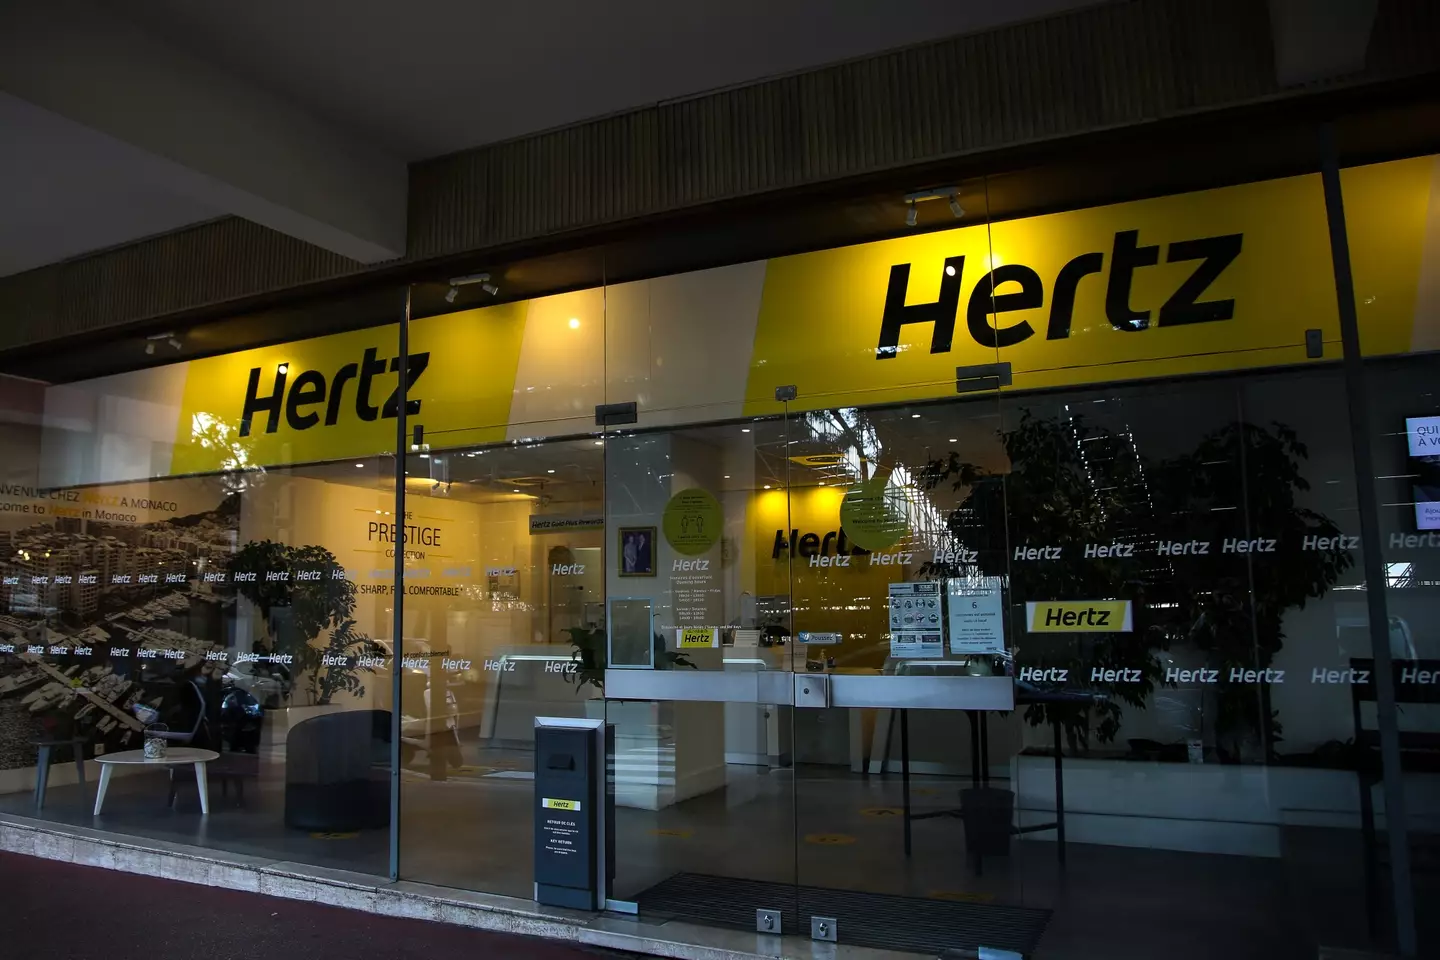 Hertz still plans to continue with electric vehicle initiatives.